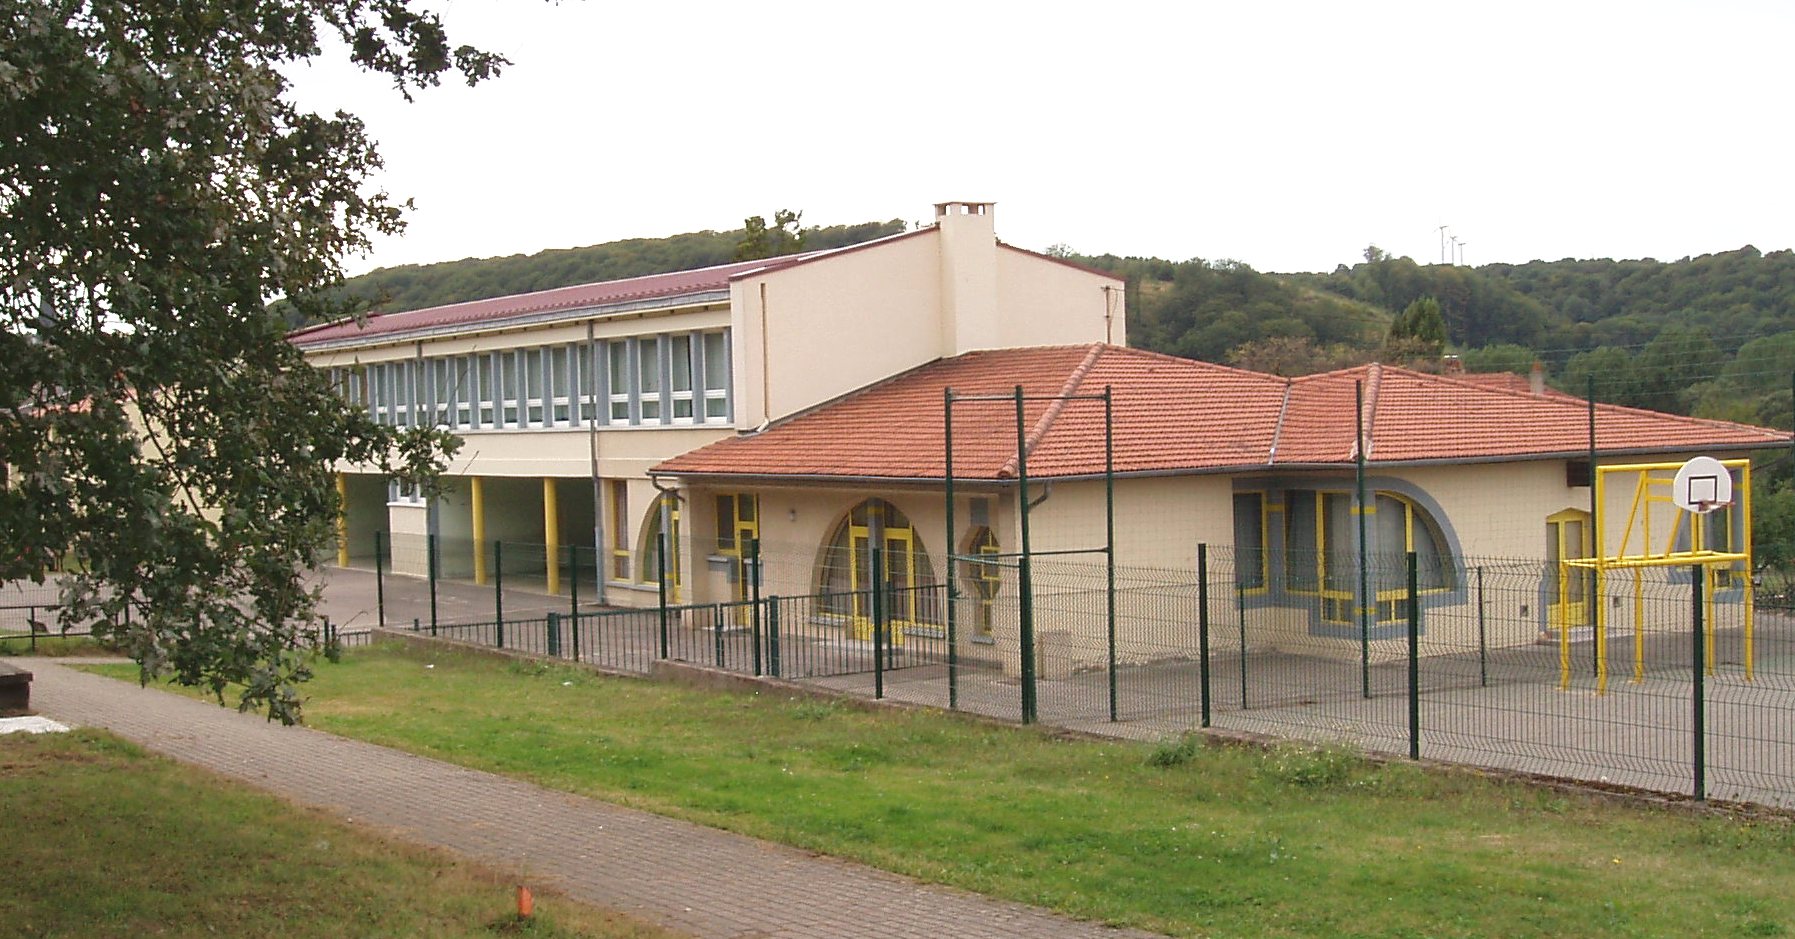 05 GROUPE SCOLAIRE